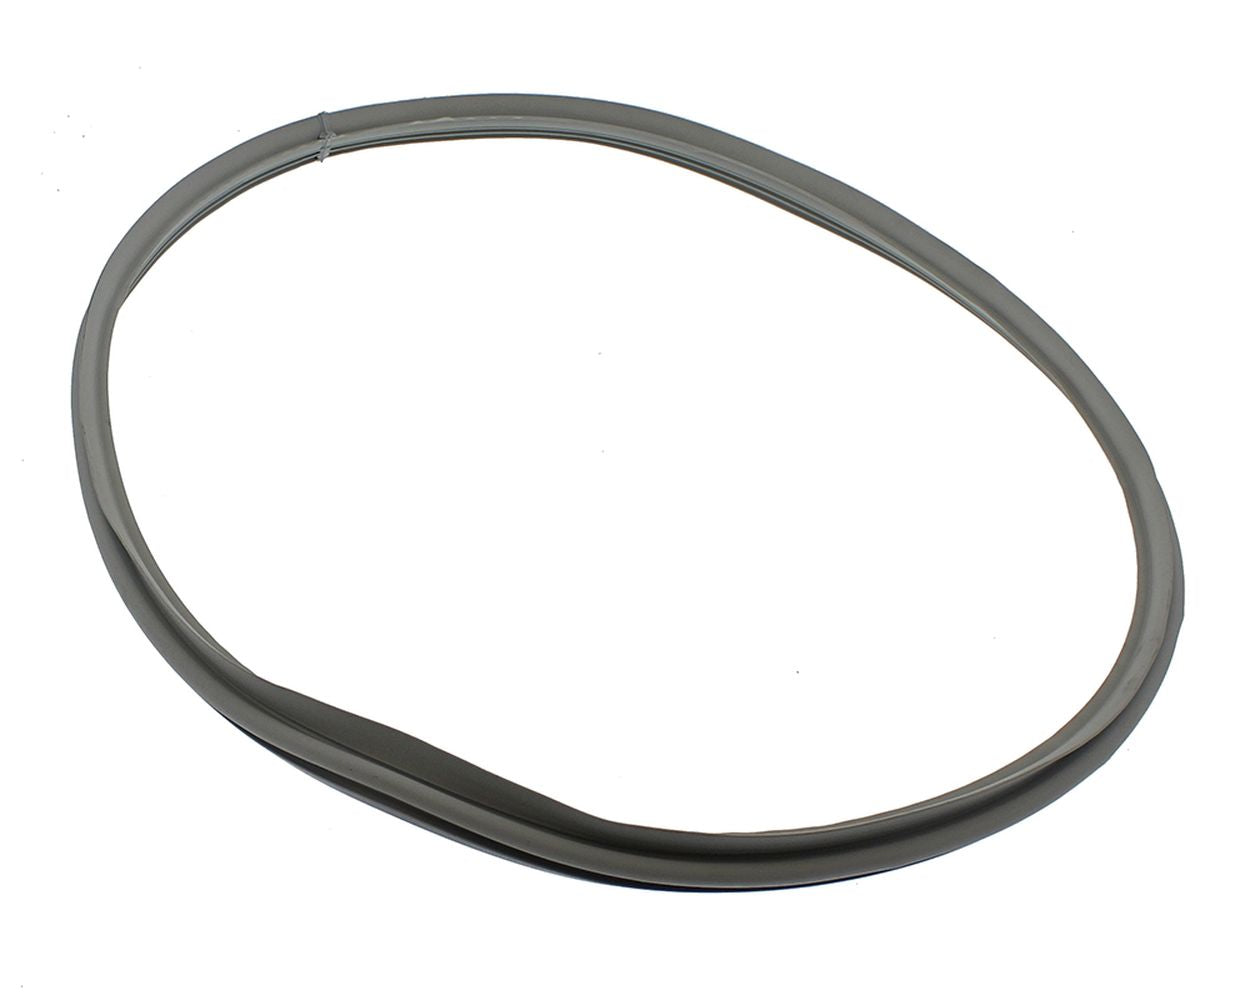 Candy Hoover Tumble Dryer Front Door Duct Seal